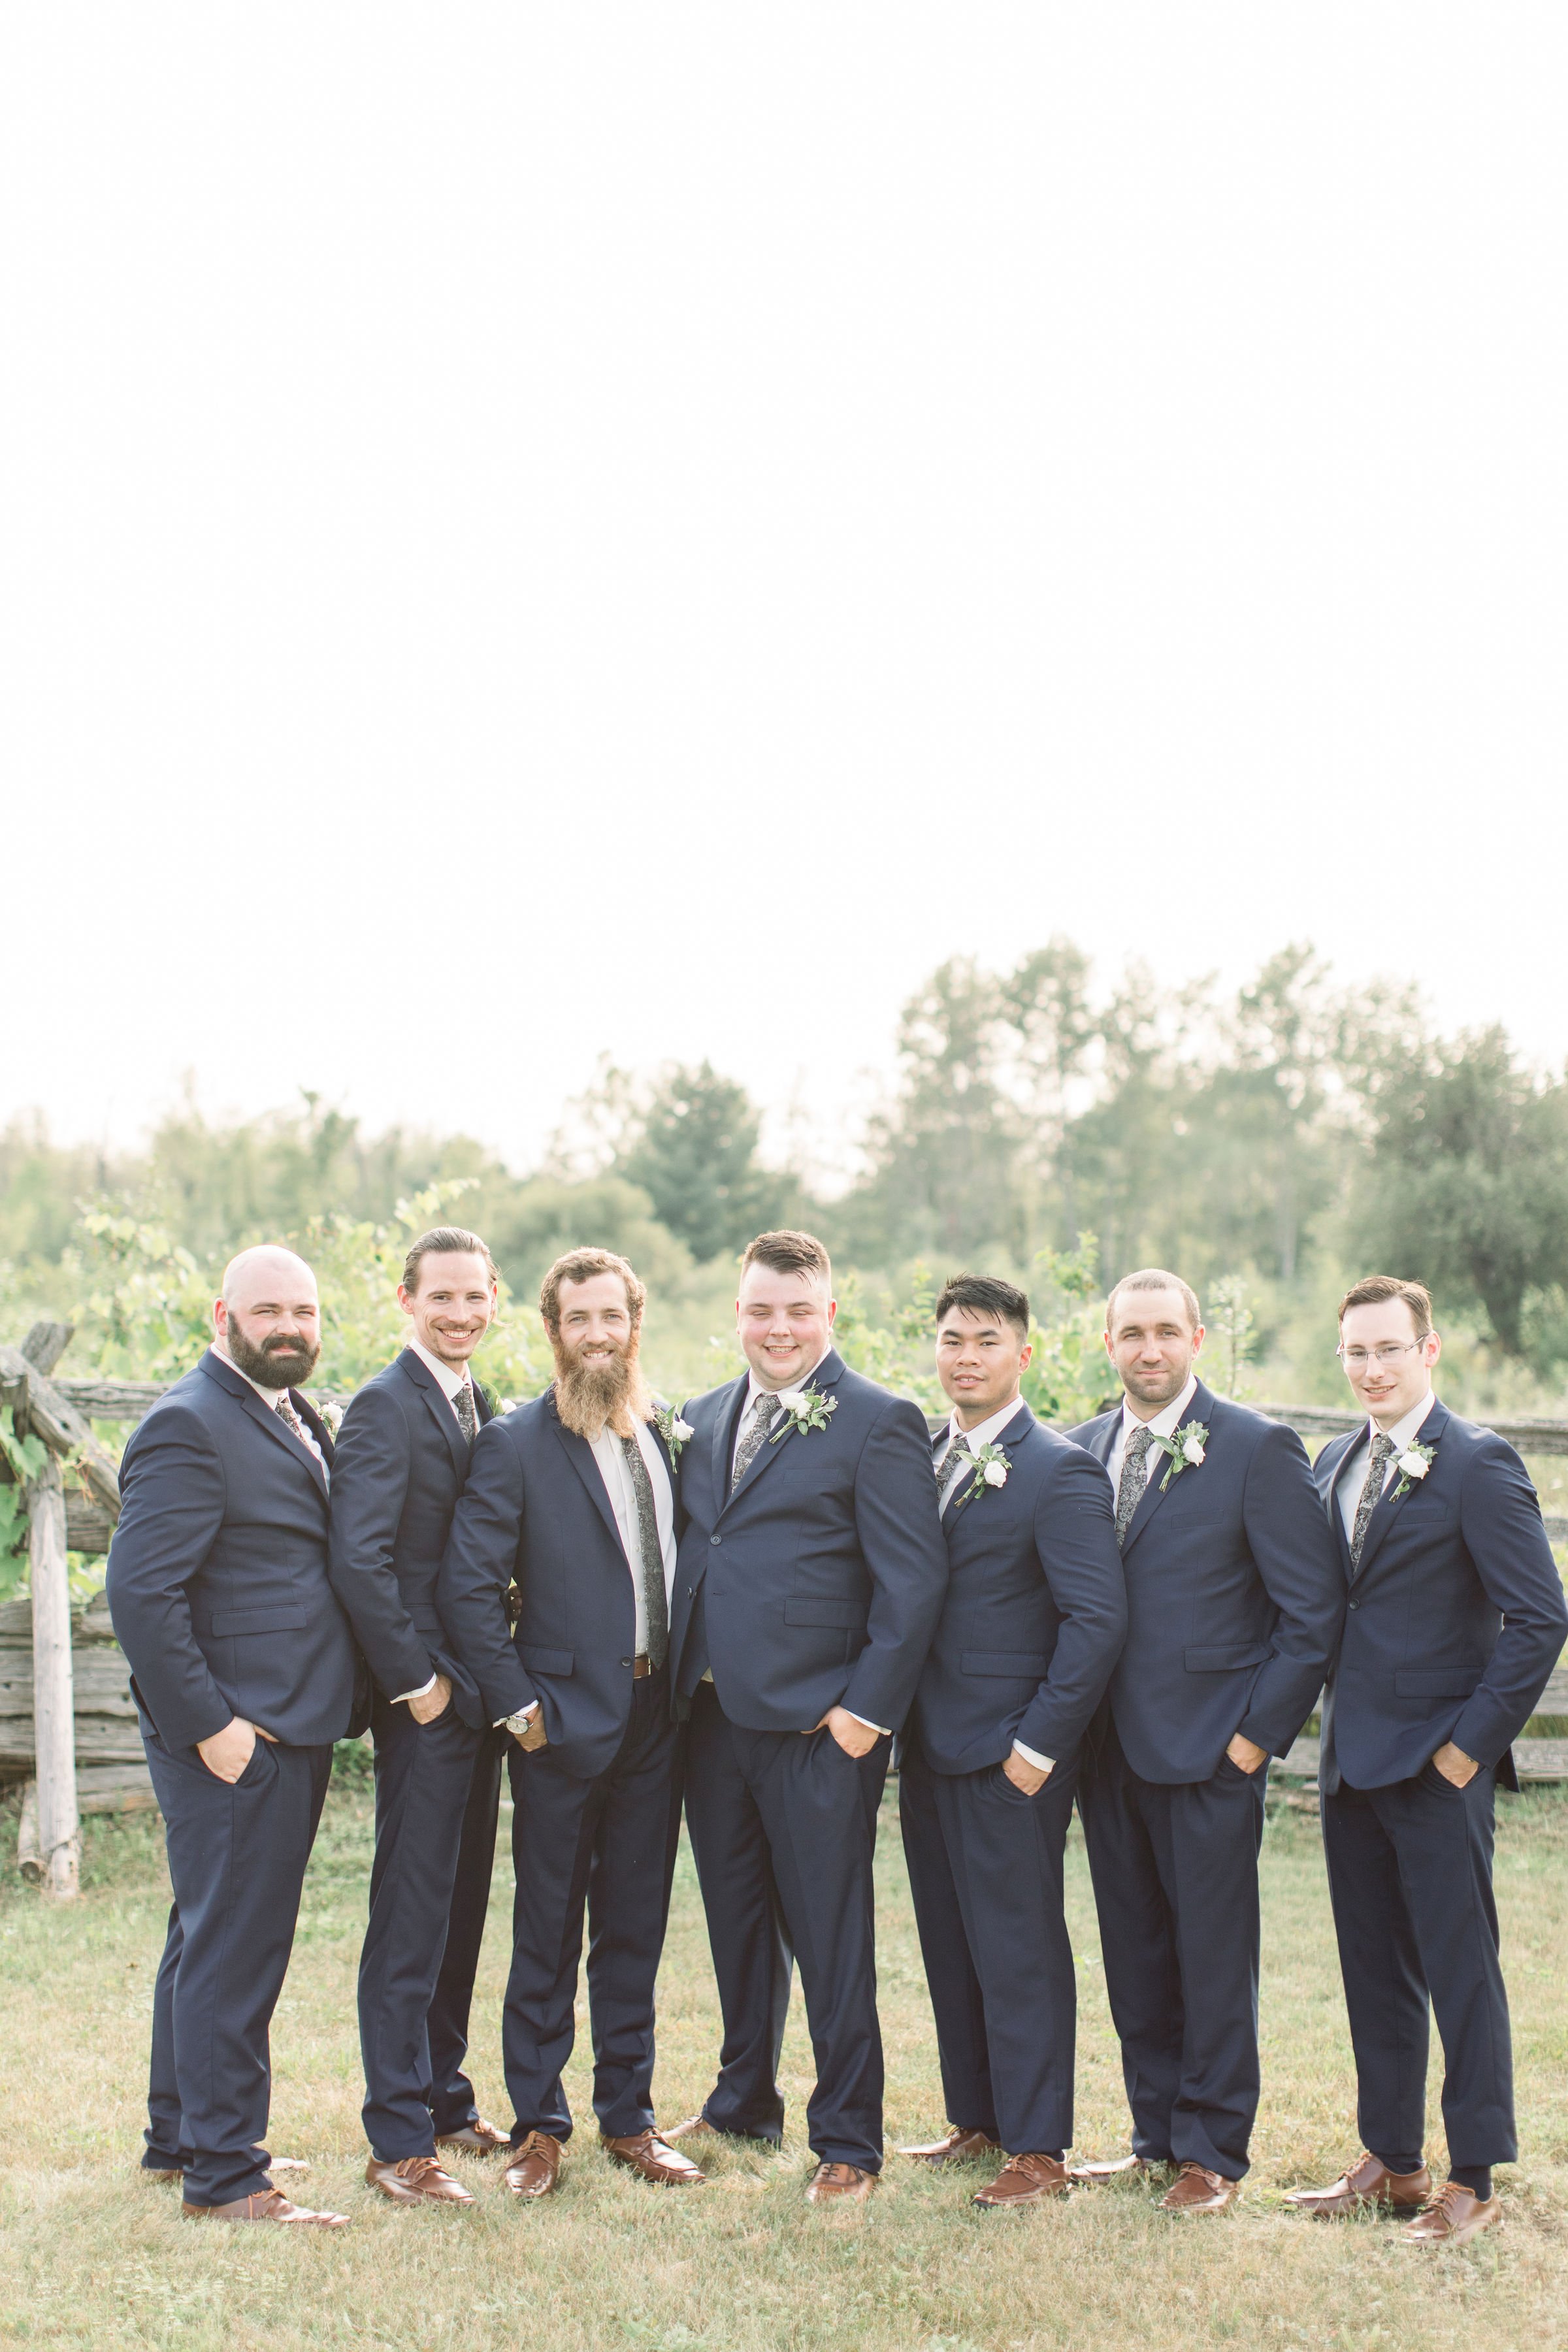  Groom with his groomsmen all wearing black in a grass field at Stonefield Estates by Chelsea Mason Photography. black suits groomsmen #StonefieldEstates #Ontarioweddings #Chelseamasonphotography #Chelseamasonengagements #Ontarioweddingphotographers 